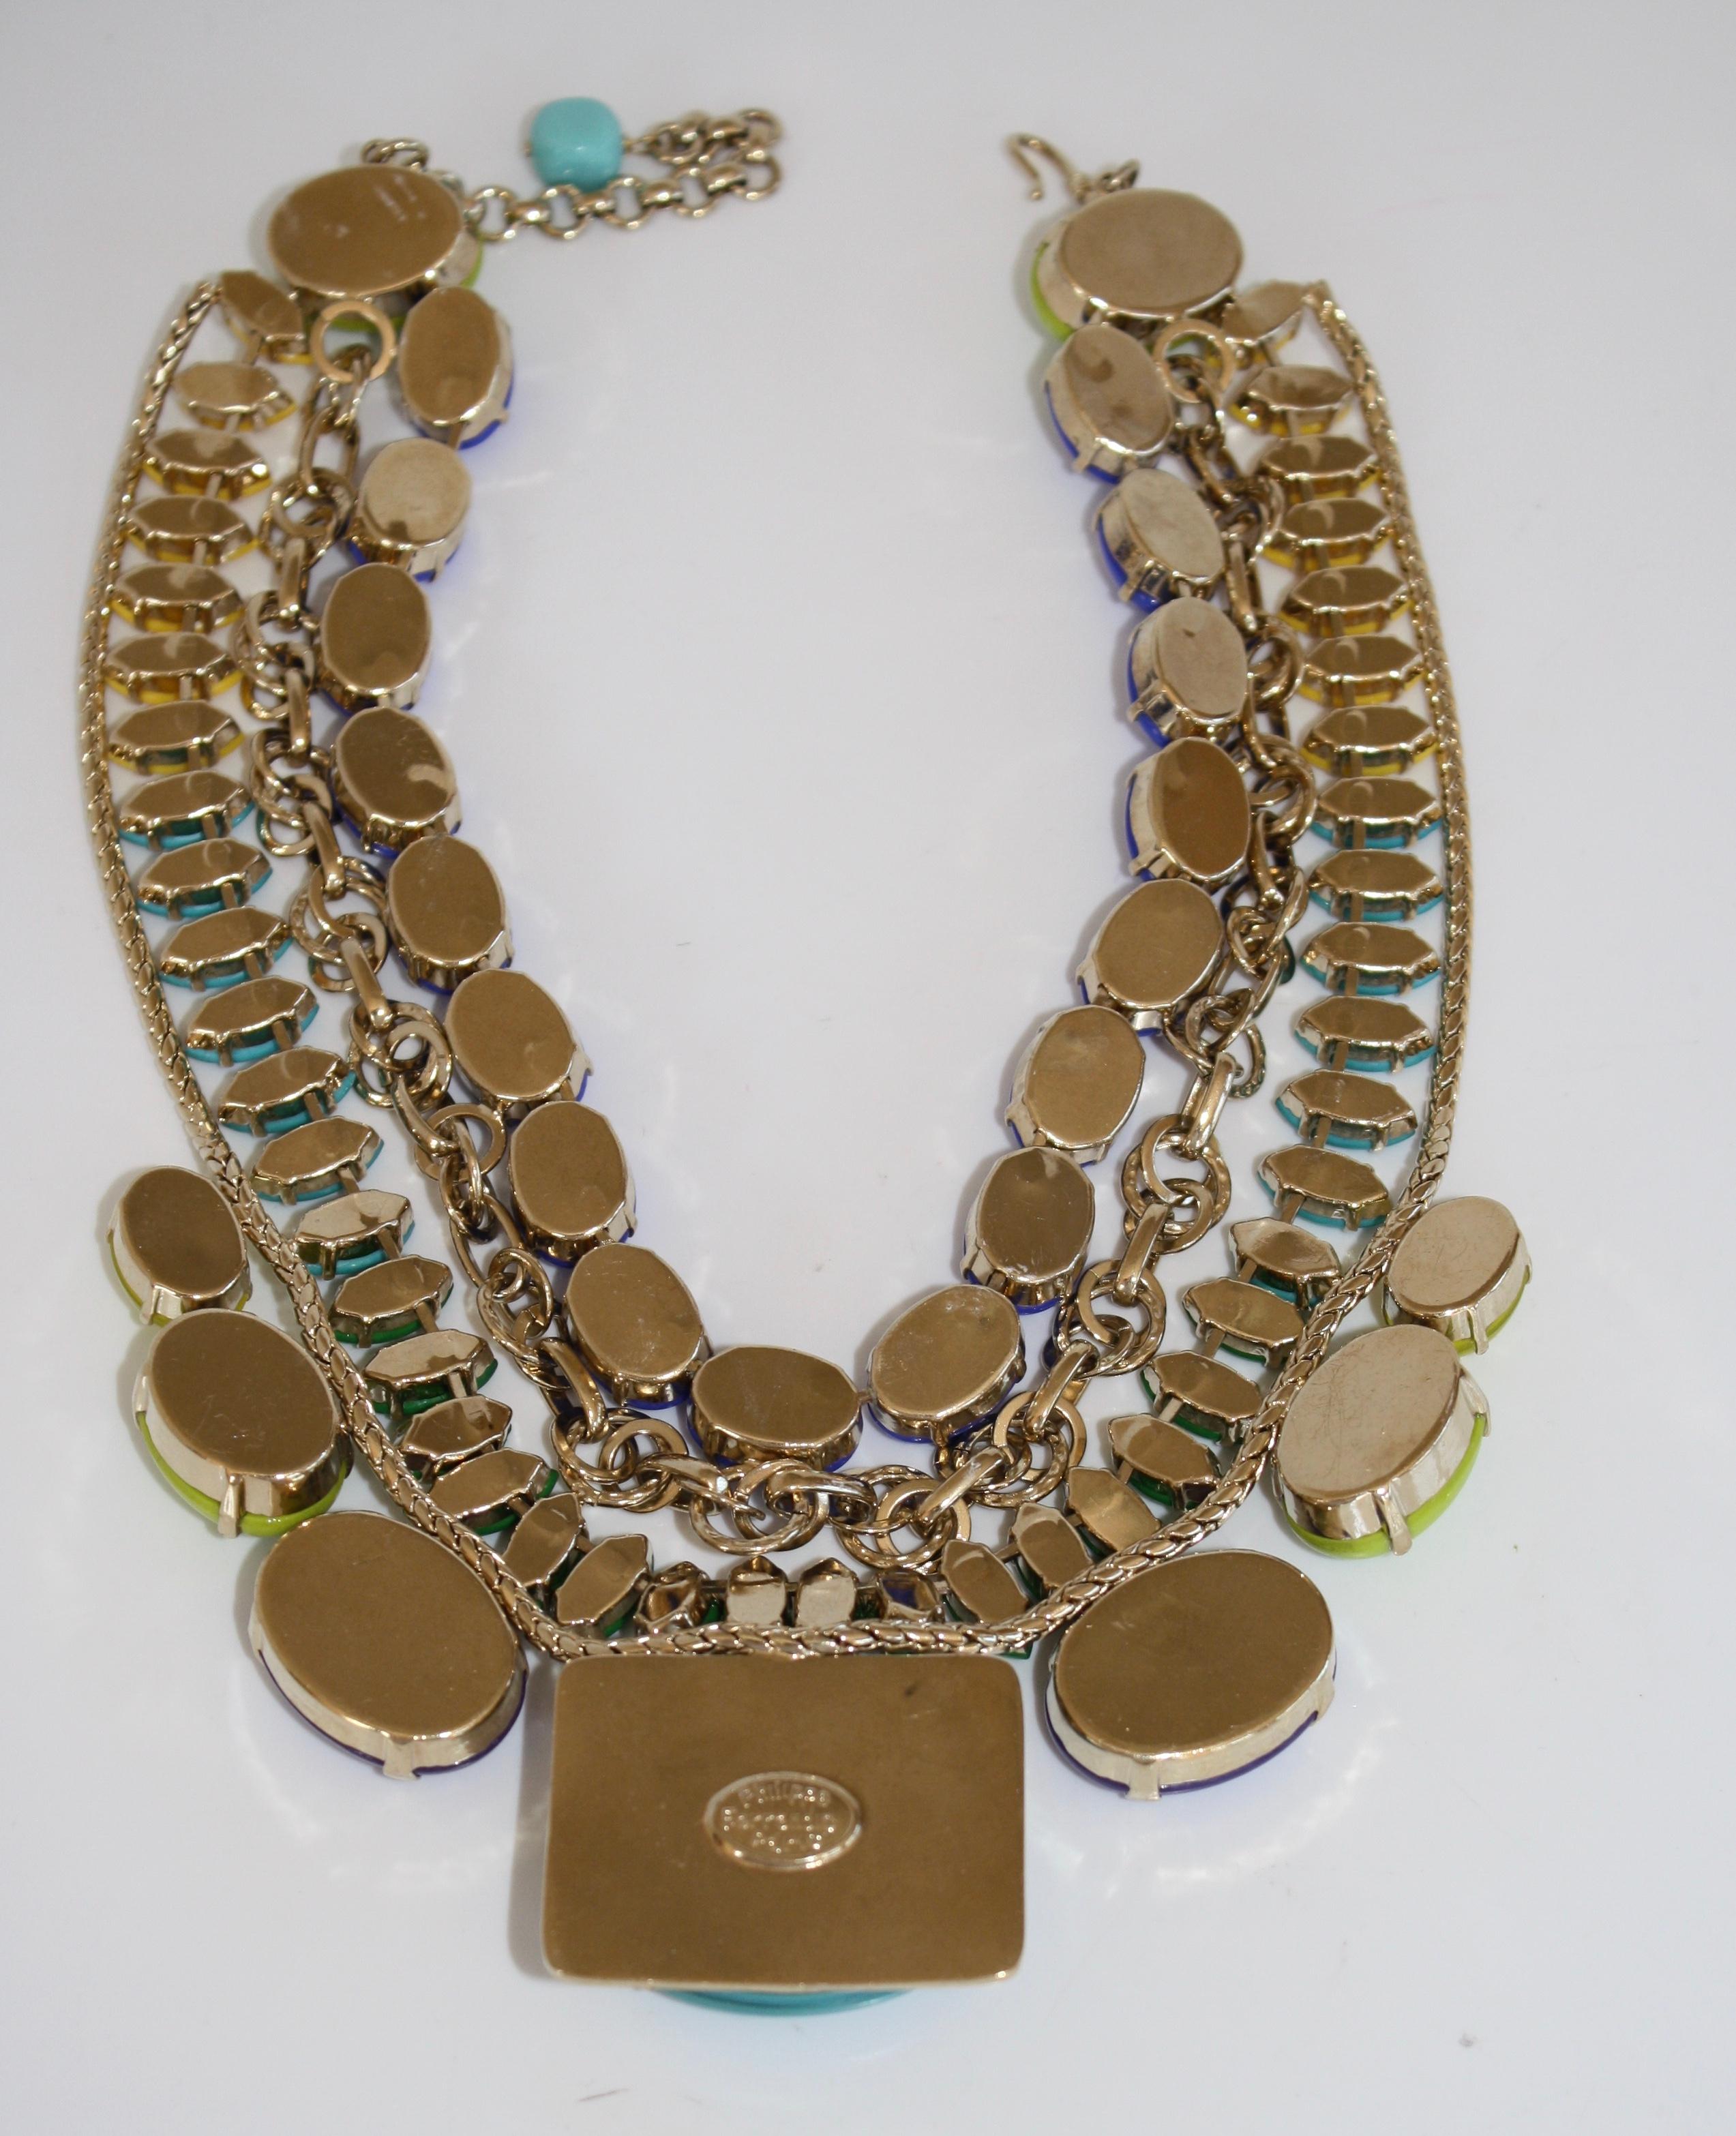 Philippe Ferrandis Handmade Glass and Pale Gold Metallic Treatment Necklace 3